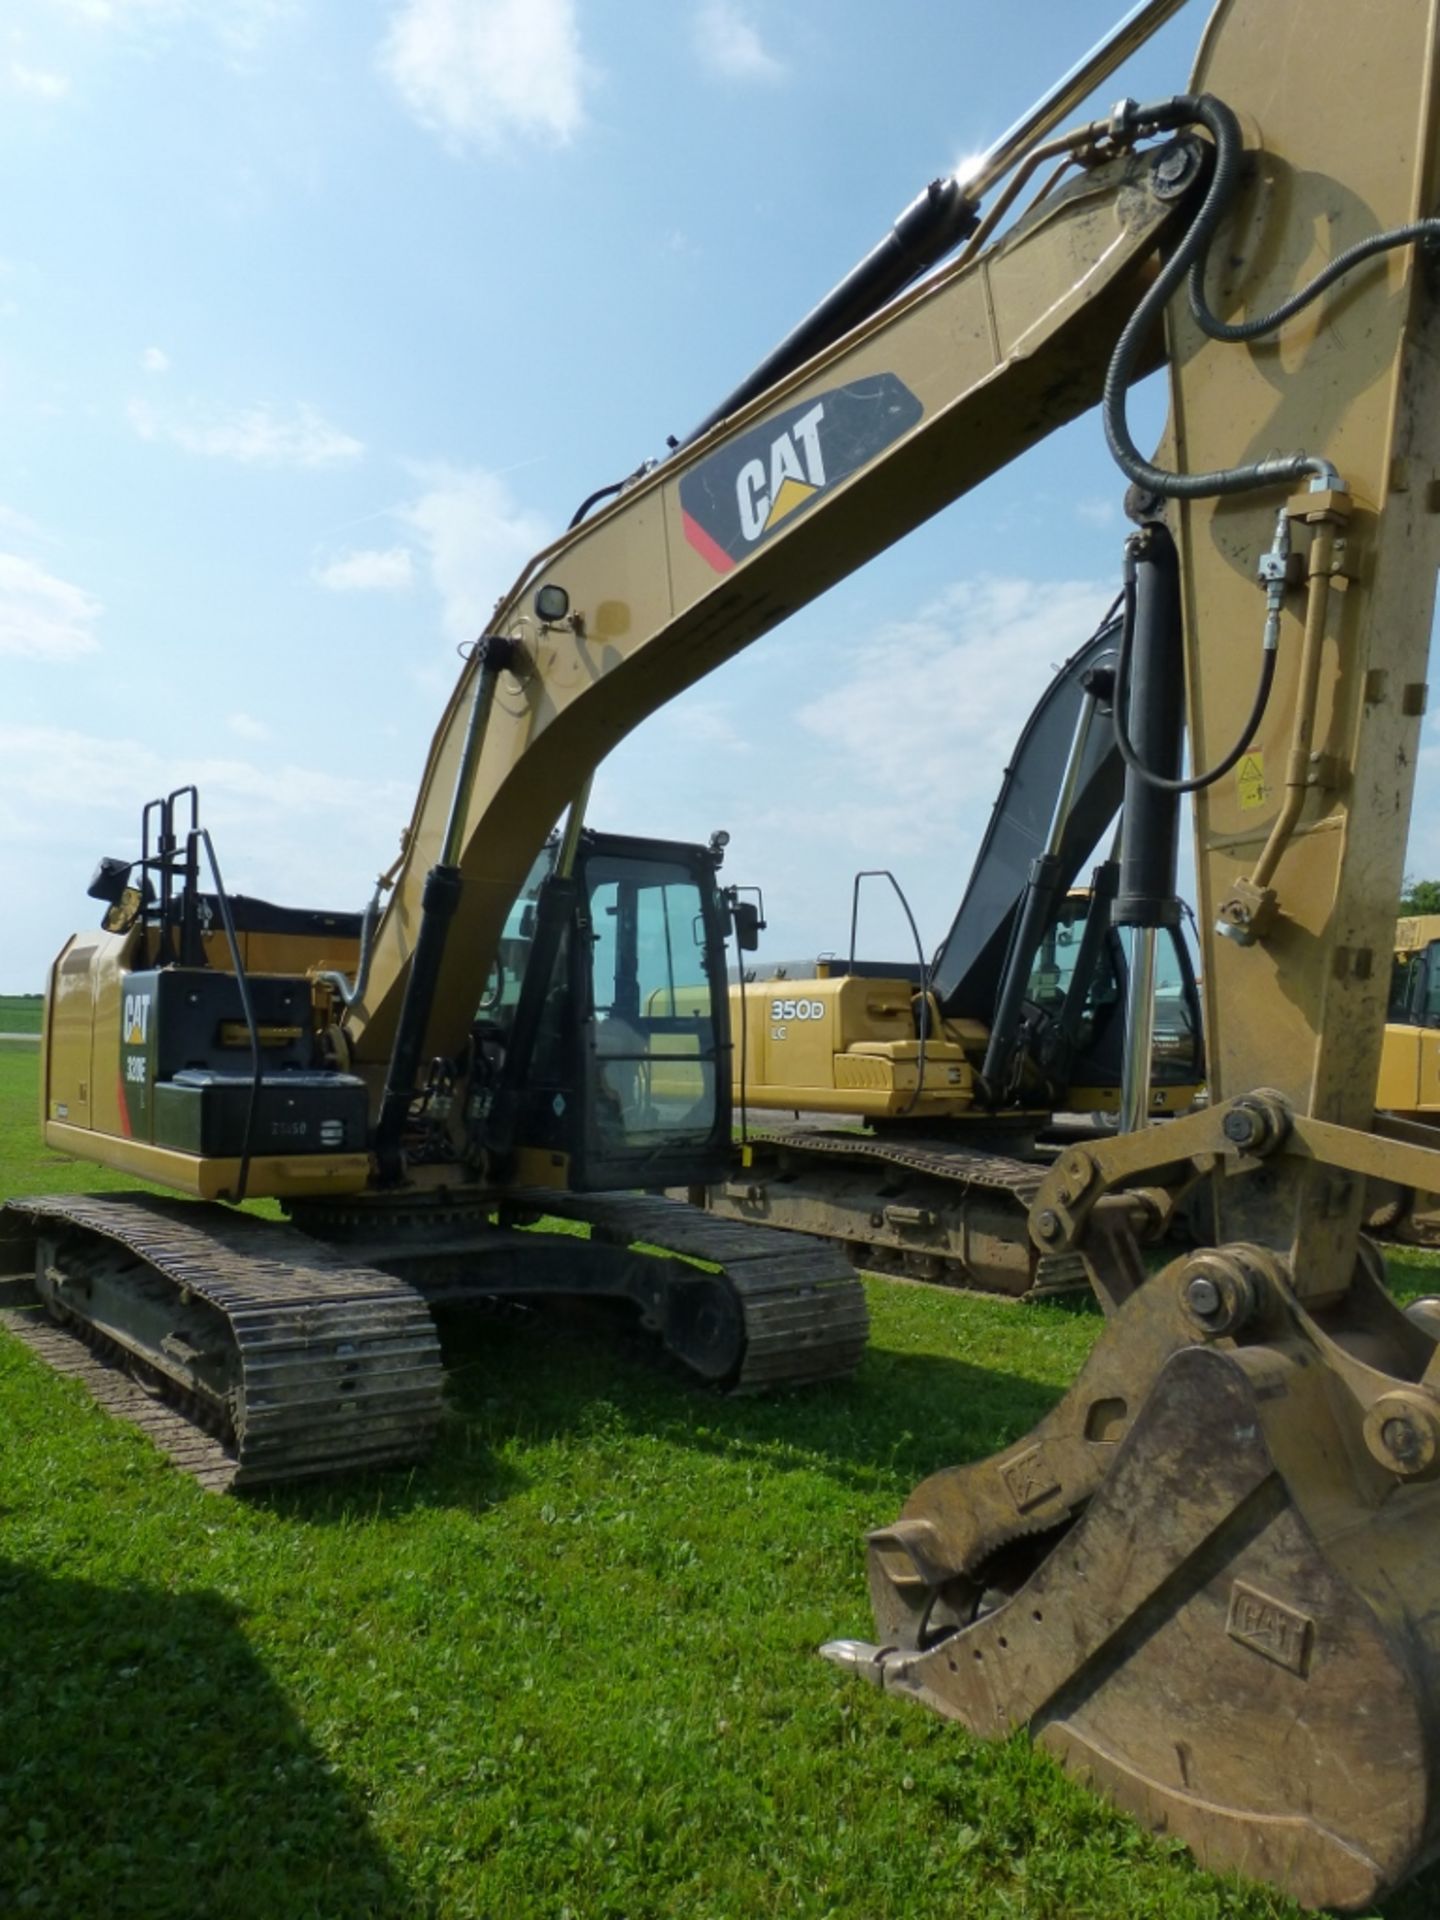 2014 CAT 320EL excavator with hydraulic thumb and aux. hydraulics. 31" pads. 1,547 unverified hours.